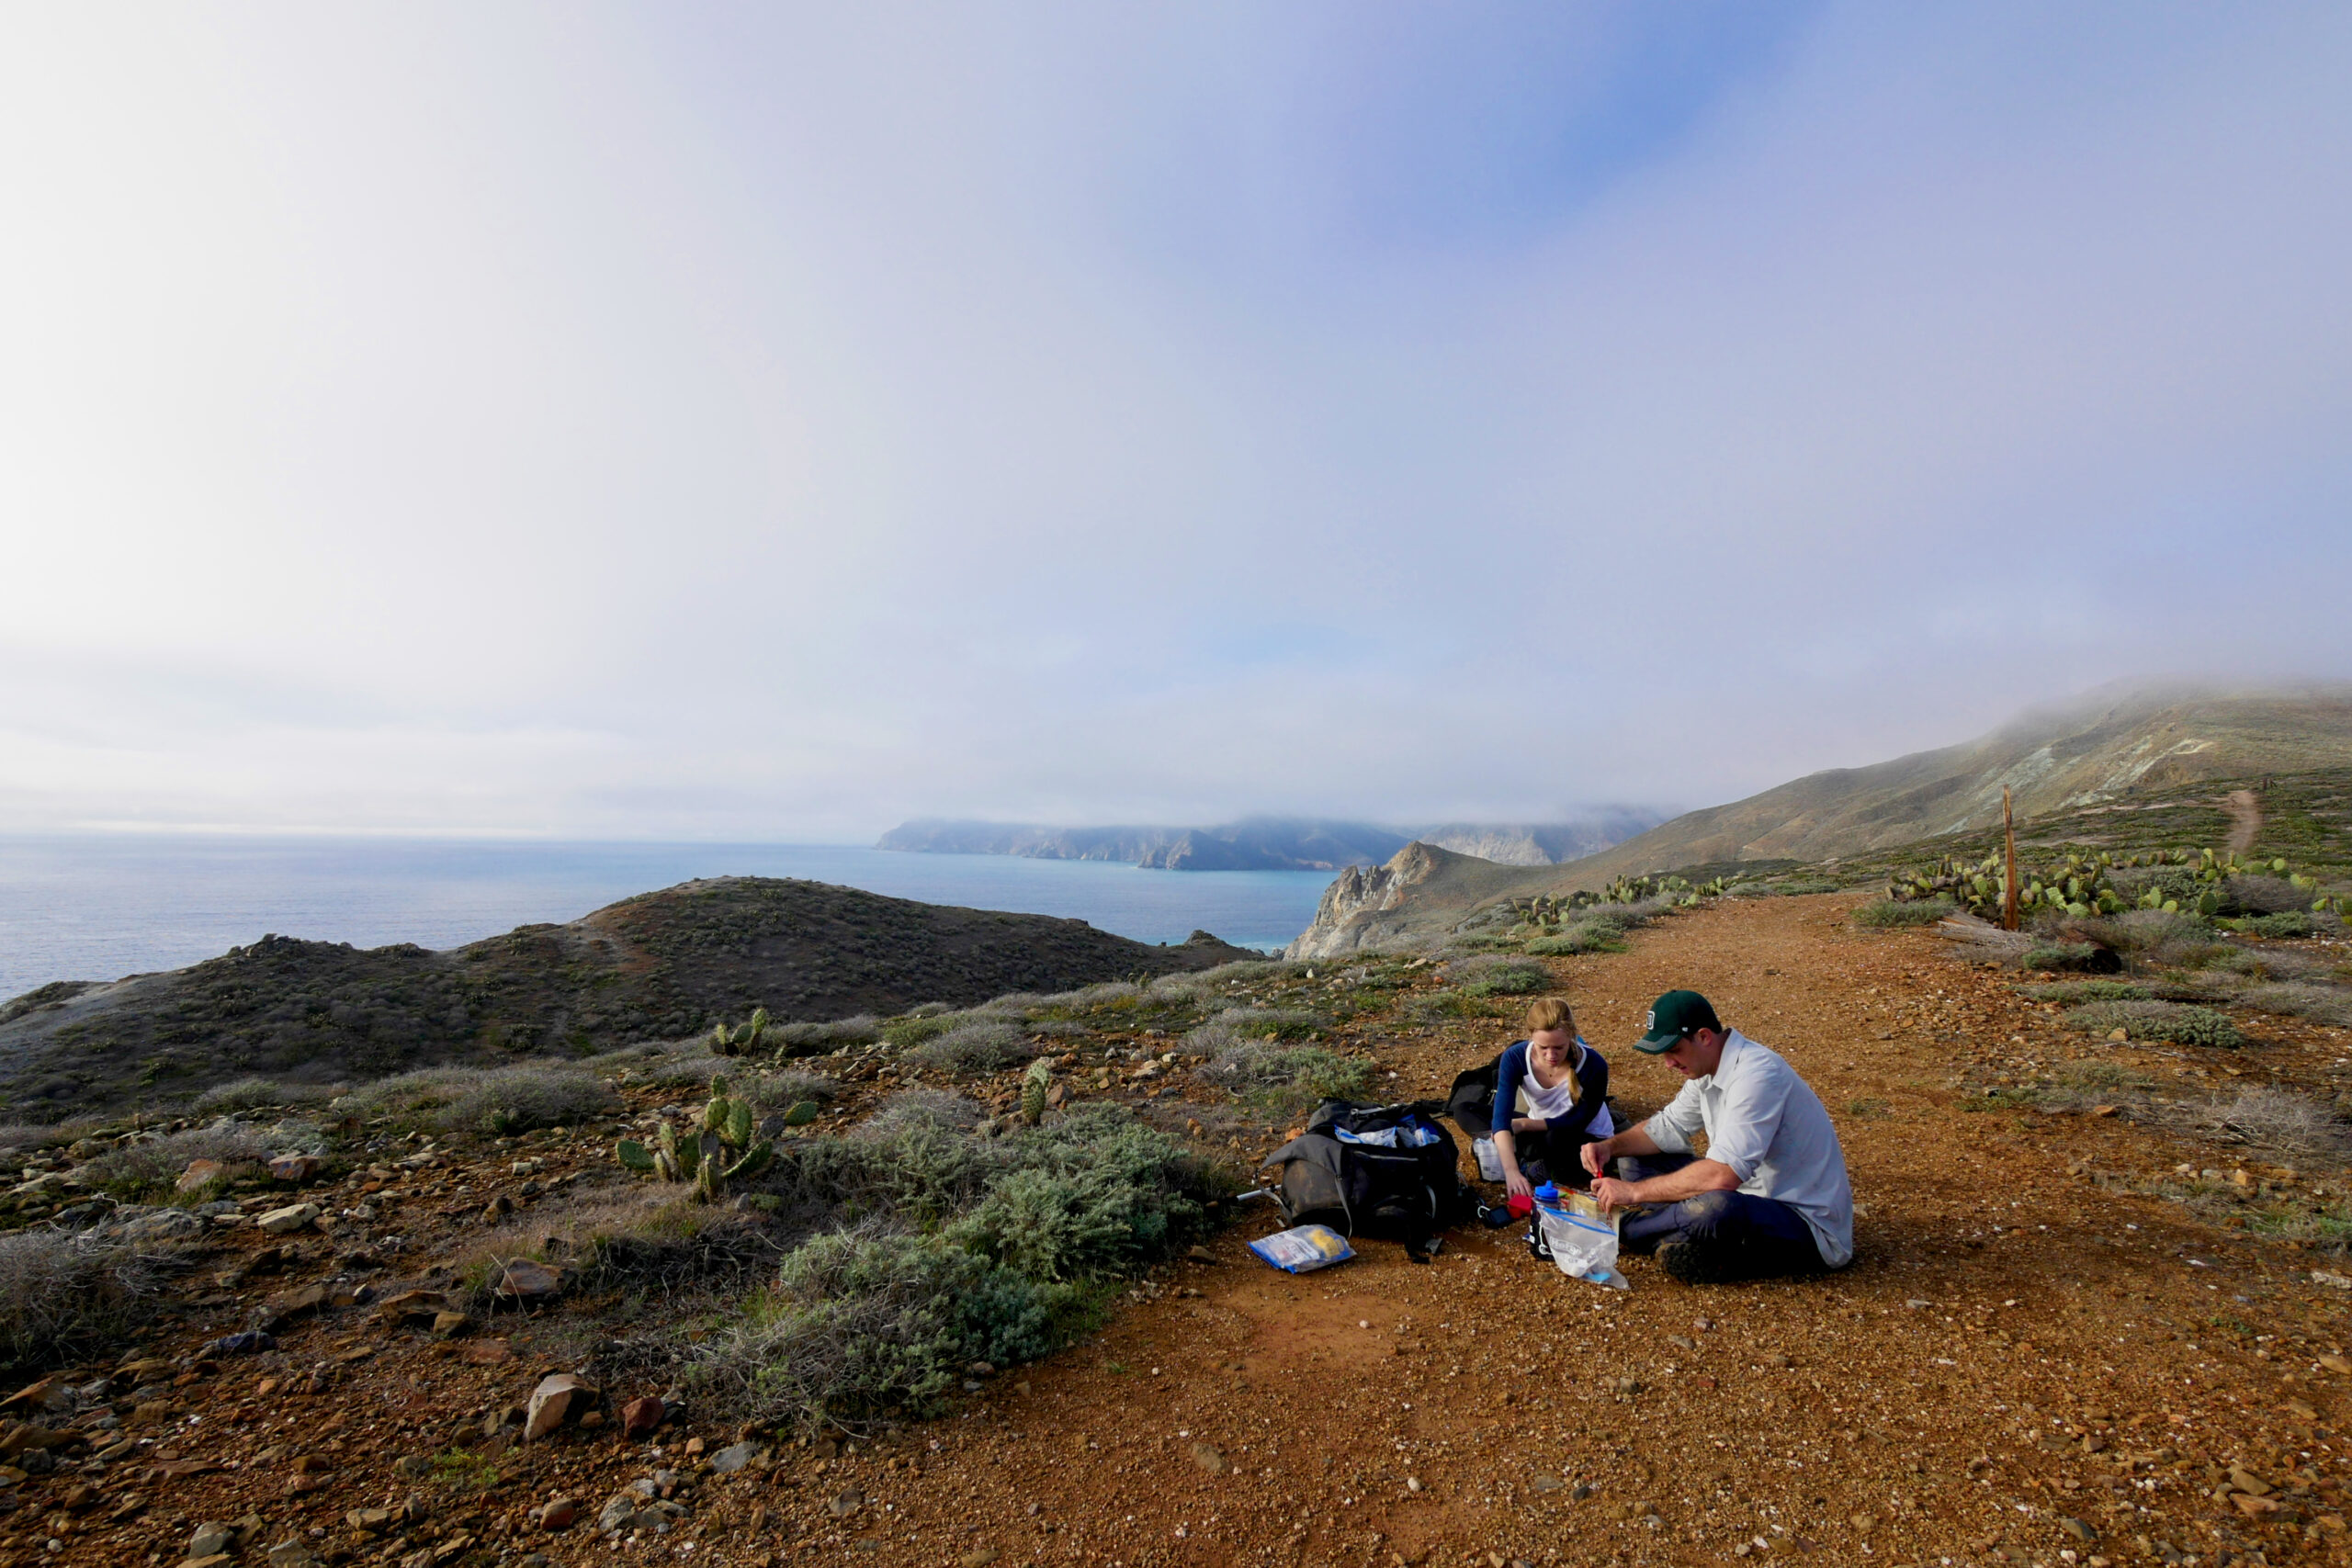 Hikers stop to eat lunch at a viewpoint above Little Harbor on the Trans-Catalina Trail.